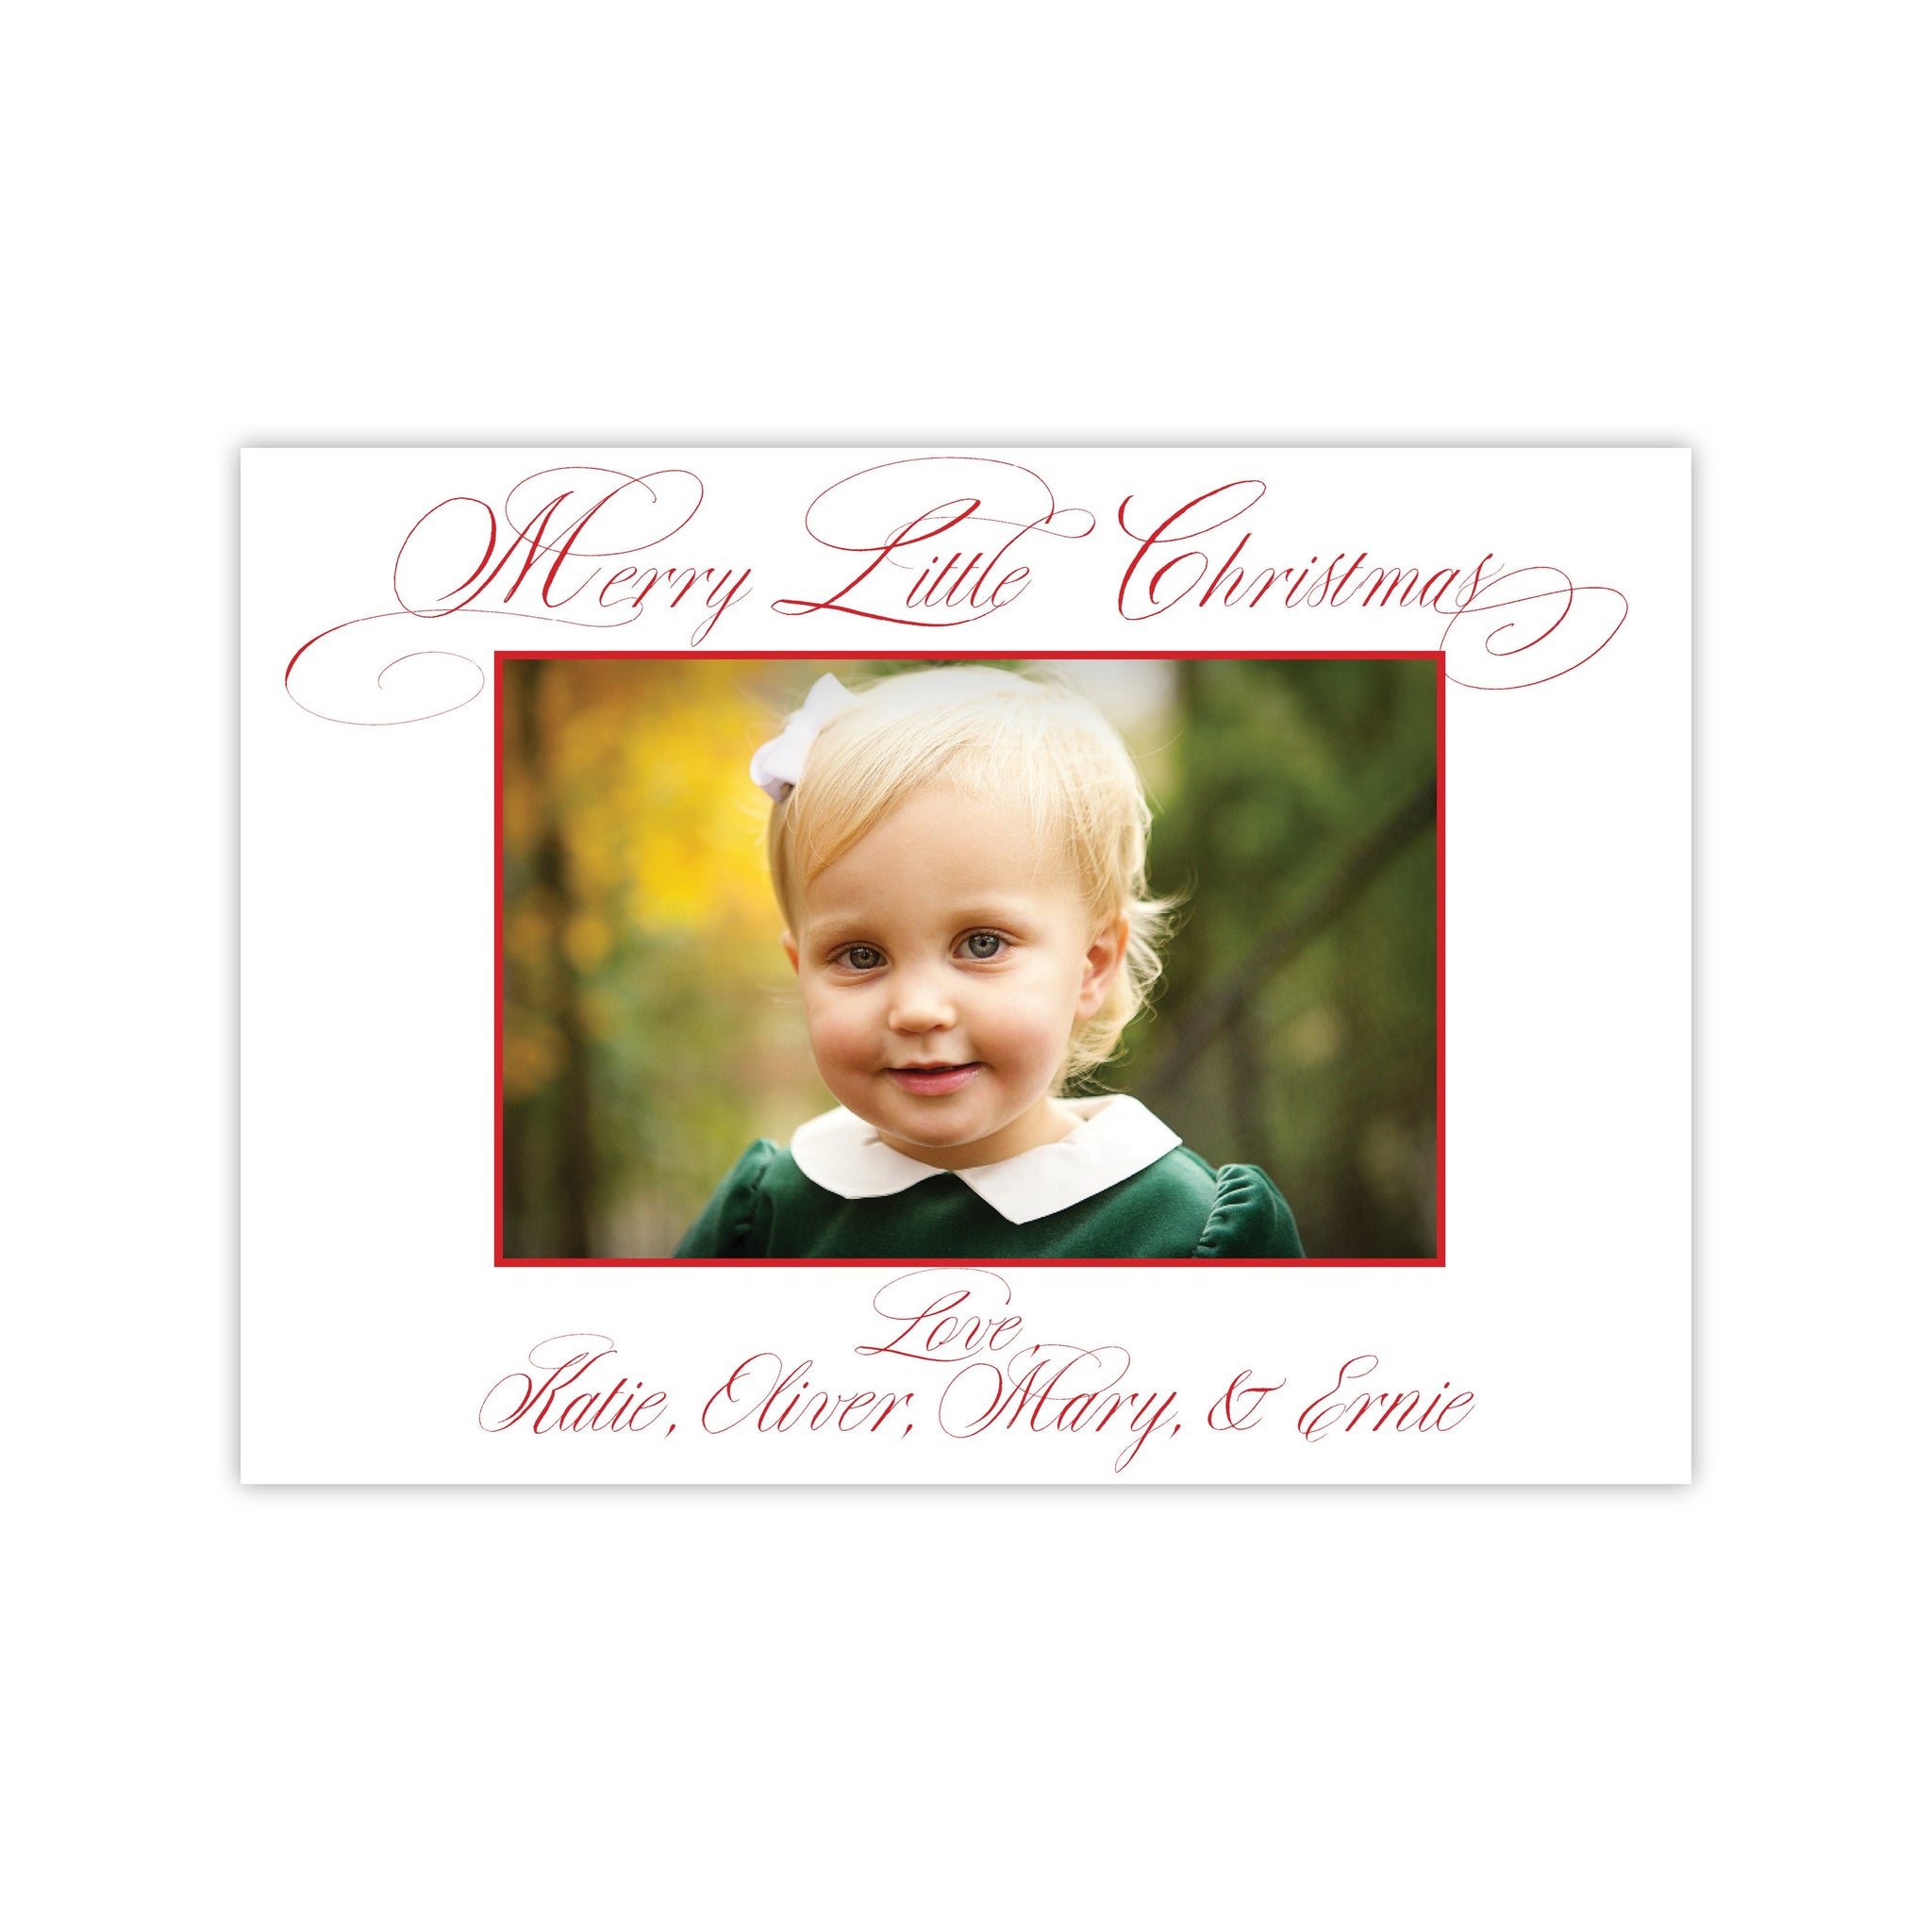 Merry Little Christmas Holiday Card